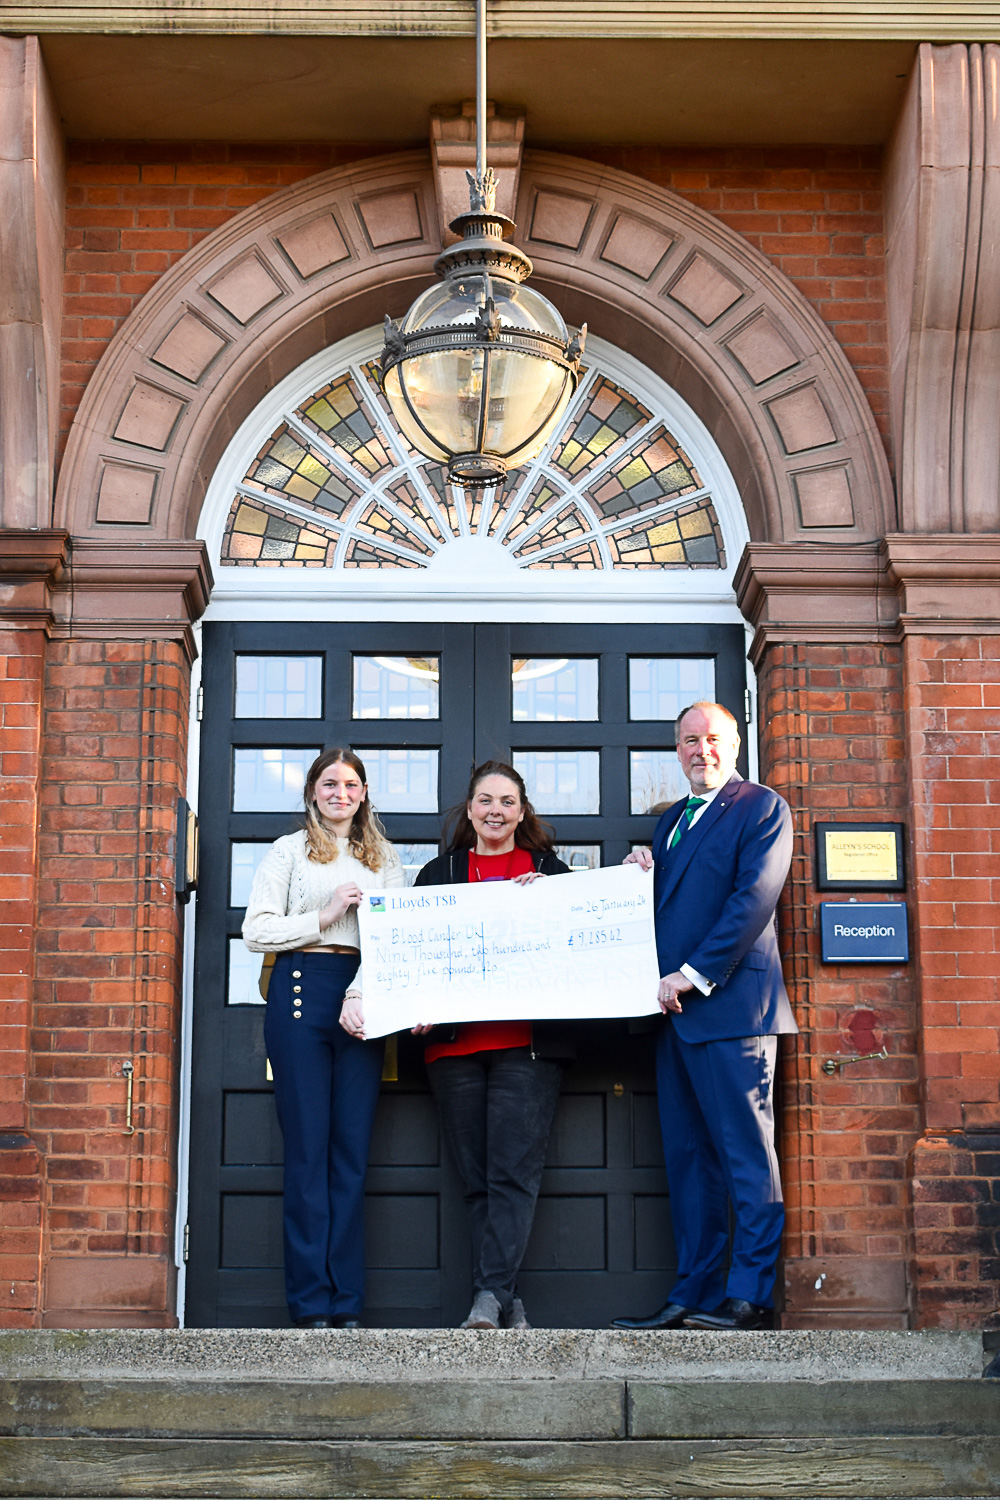 Brown’s House Raise Large Sum for Blood Cancer UK